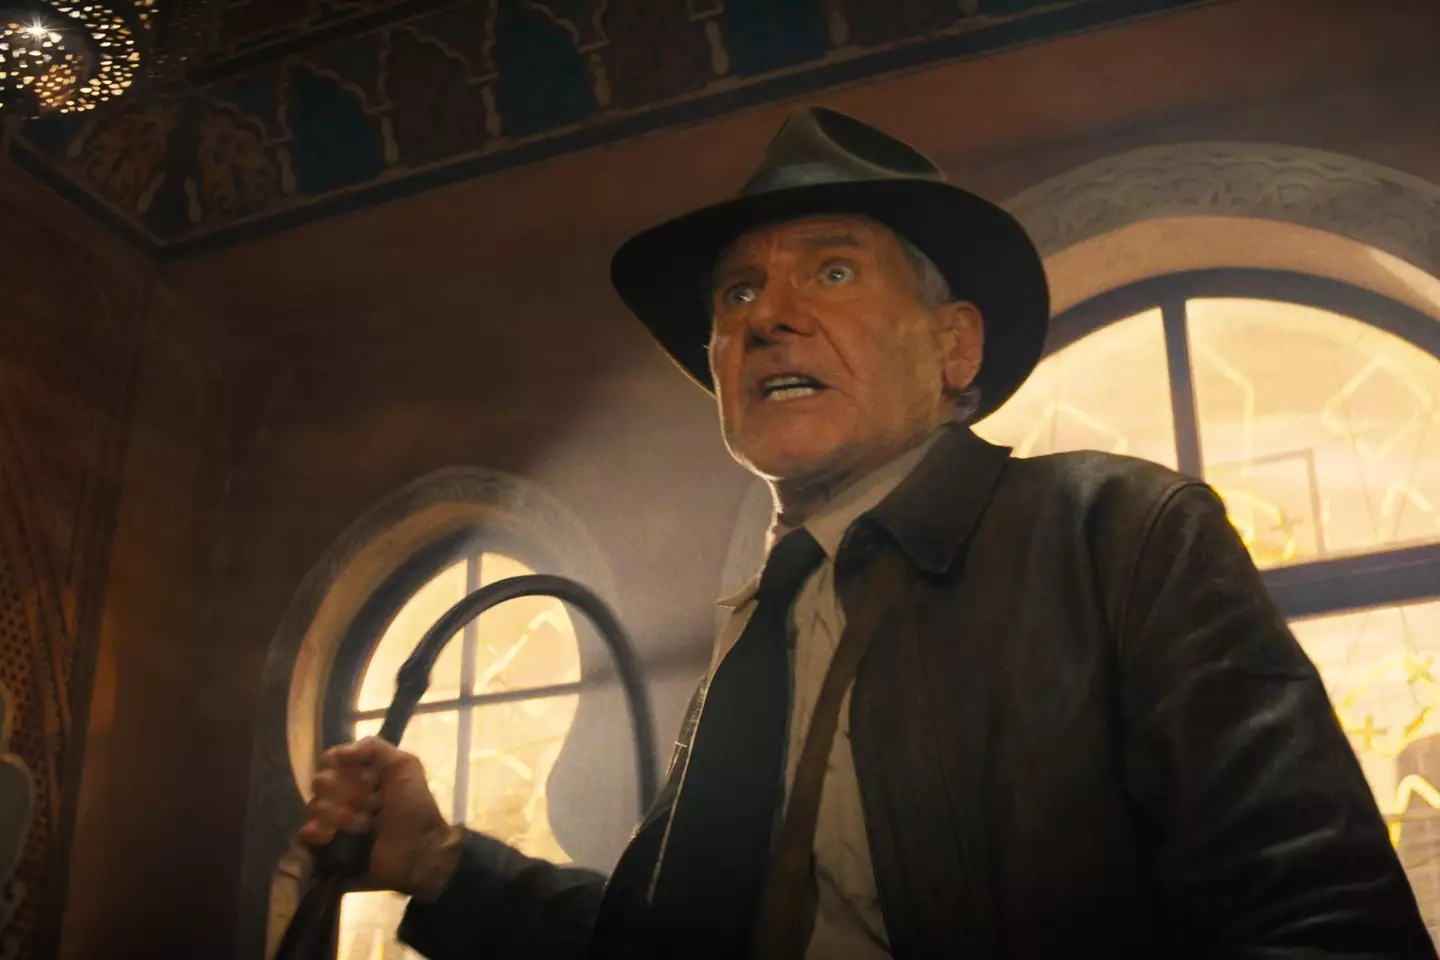 The latest Indiana Jones movie was reportedly a huge flop in cinemas.